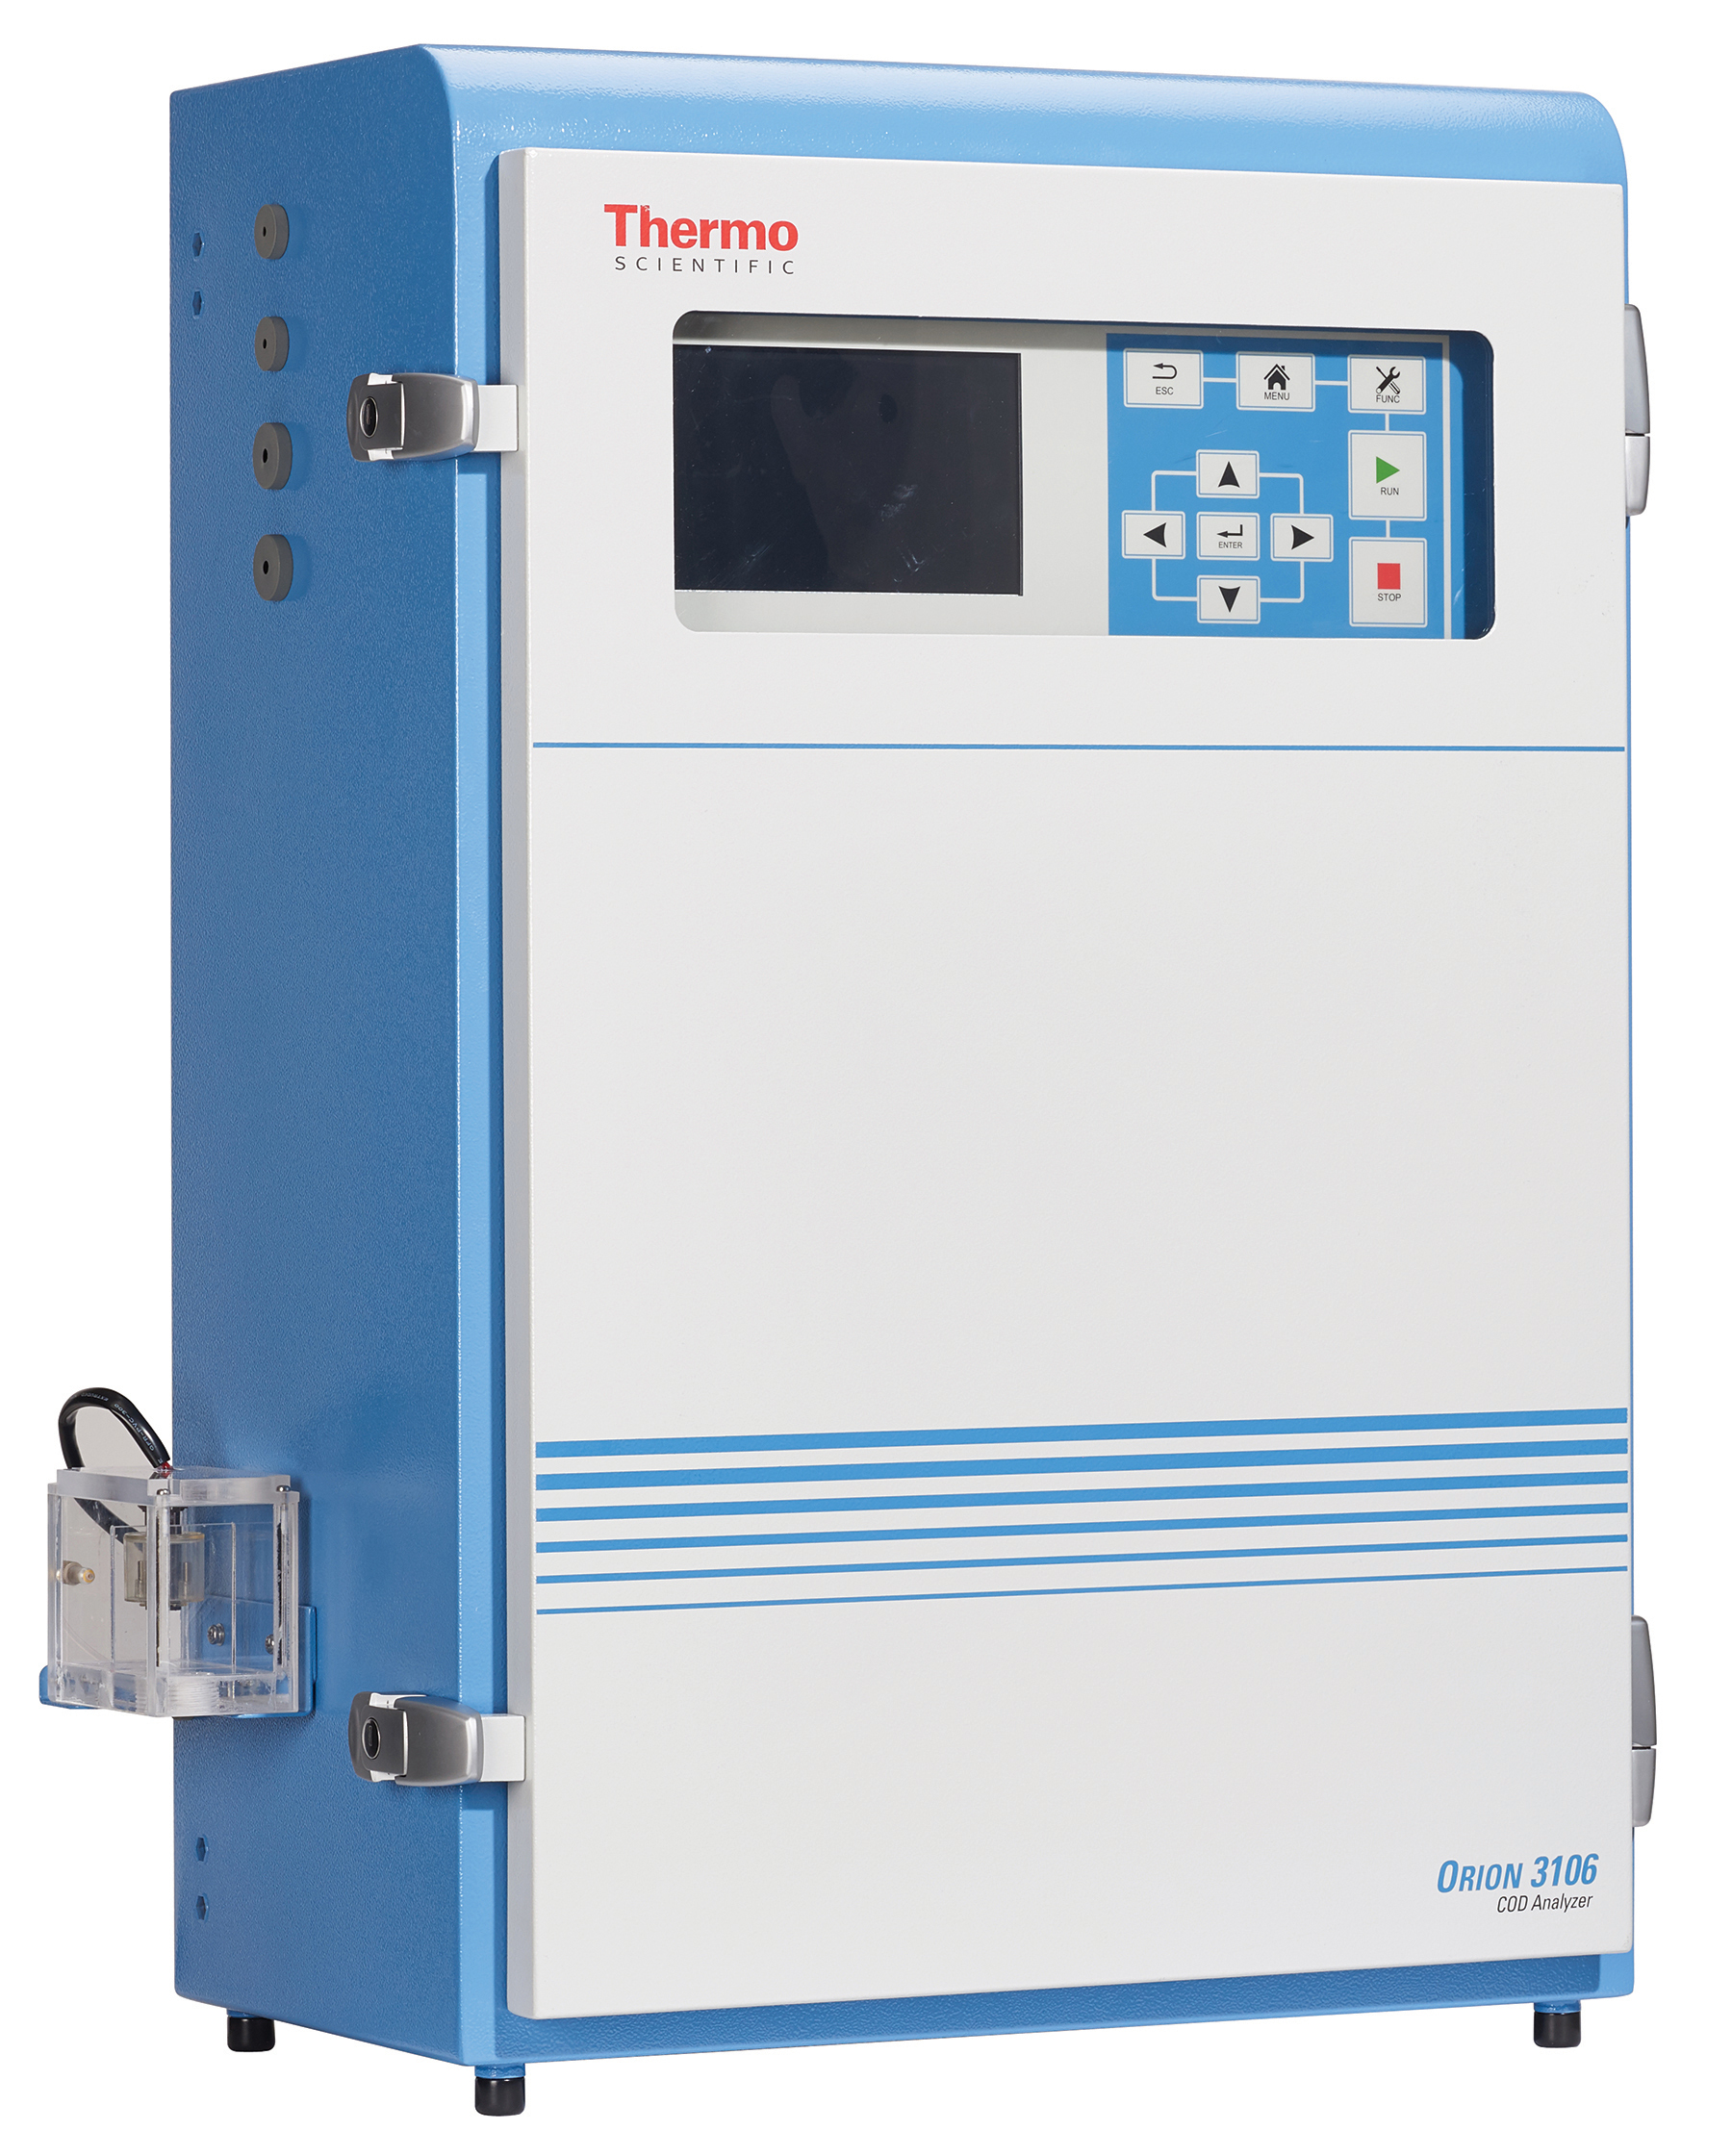 Thermo Scientific Orion Introduces New COD Analyzer For Wastewater Treatment